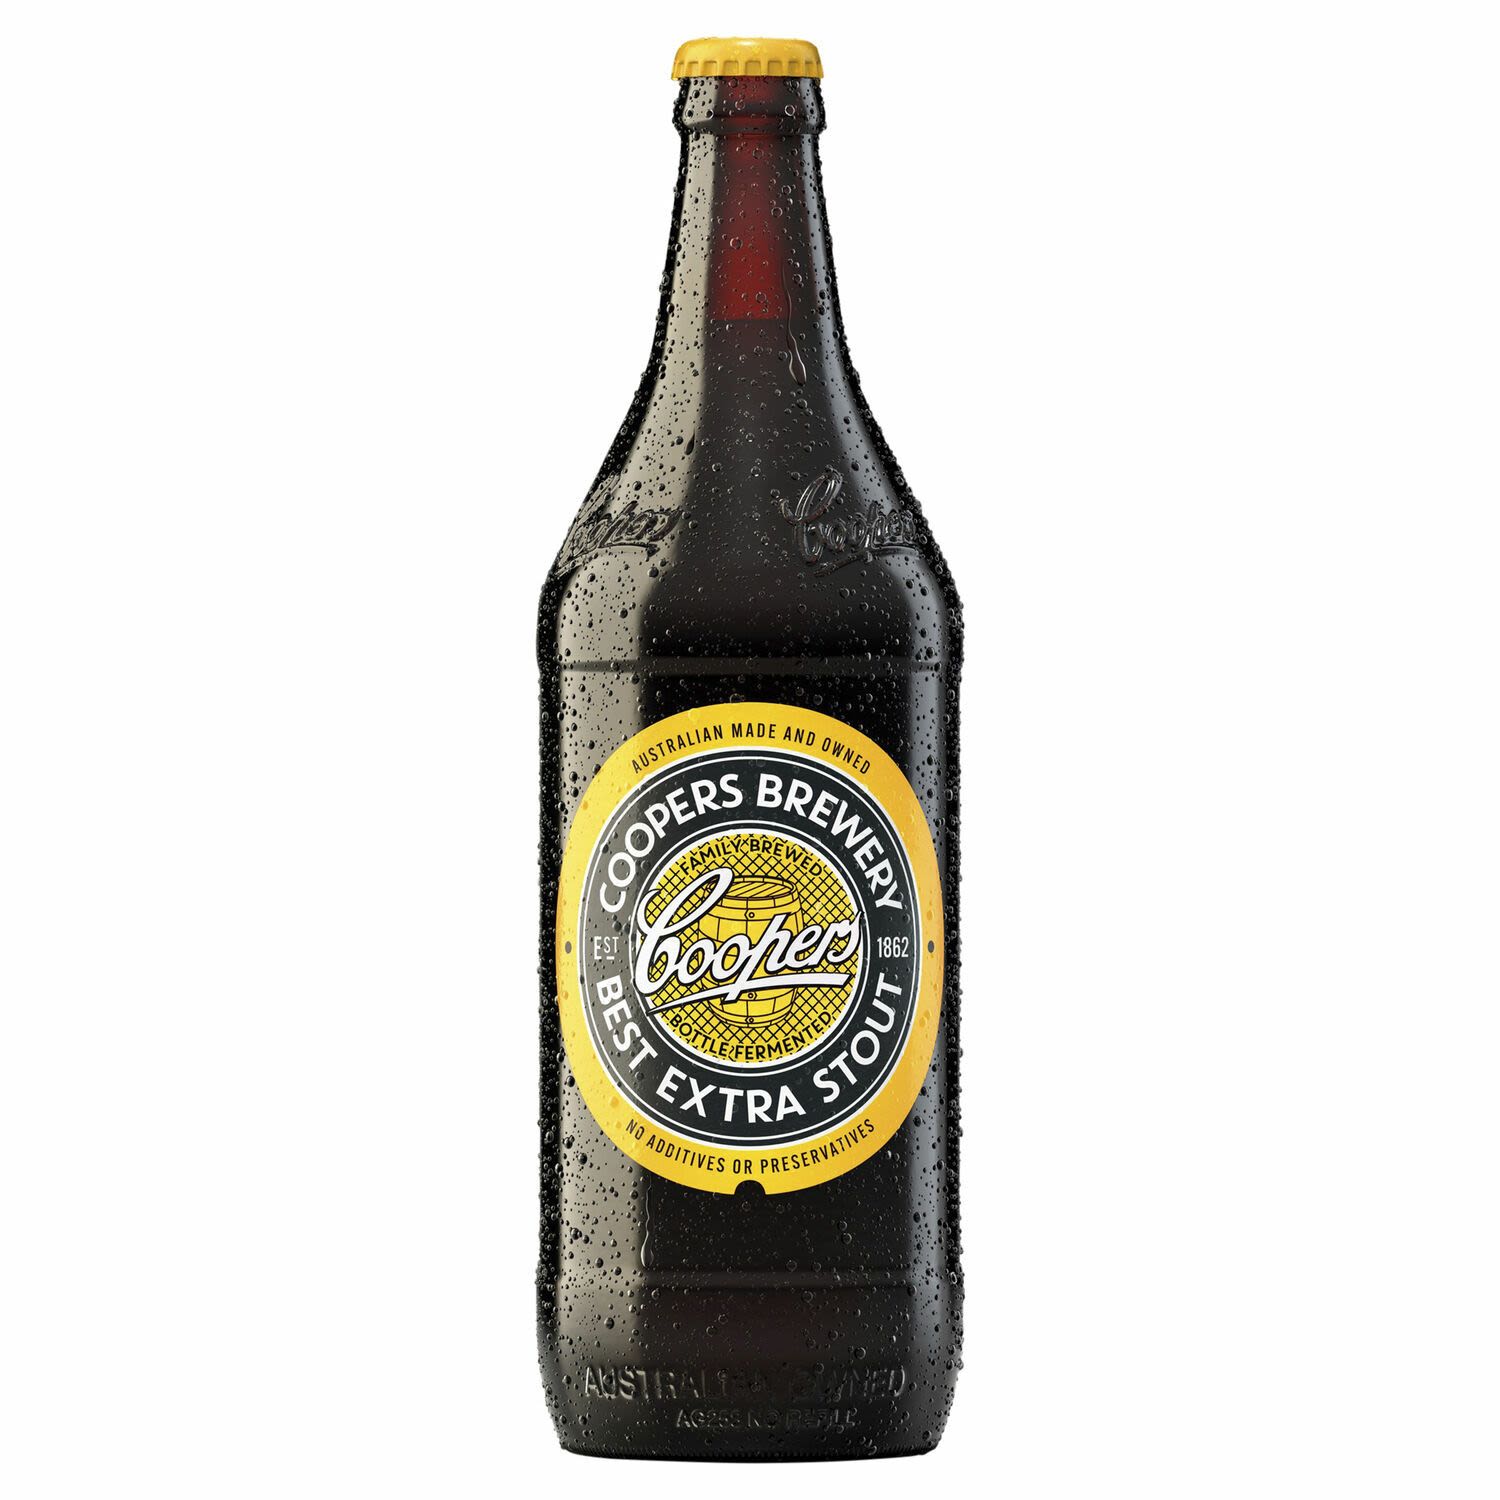 Coopers Best Extra Stout 750mL Bottle